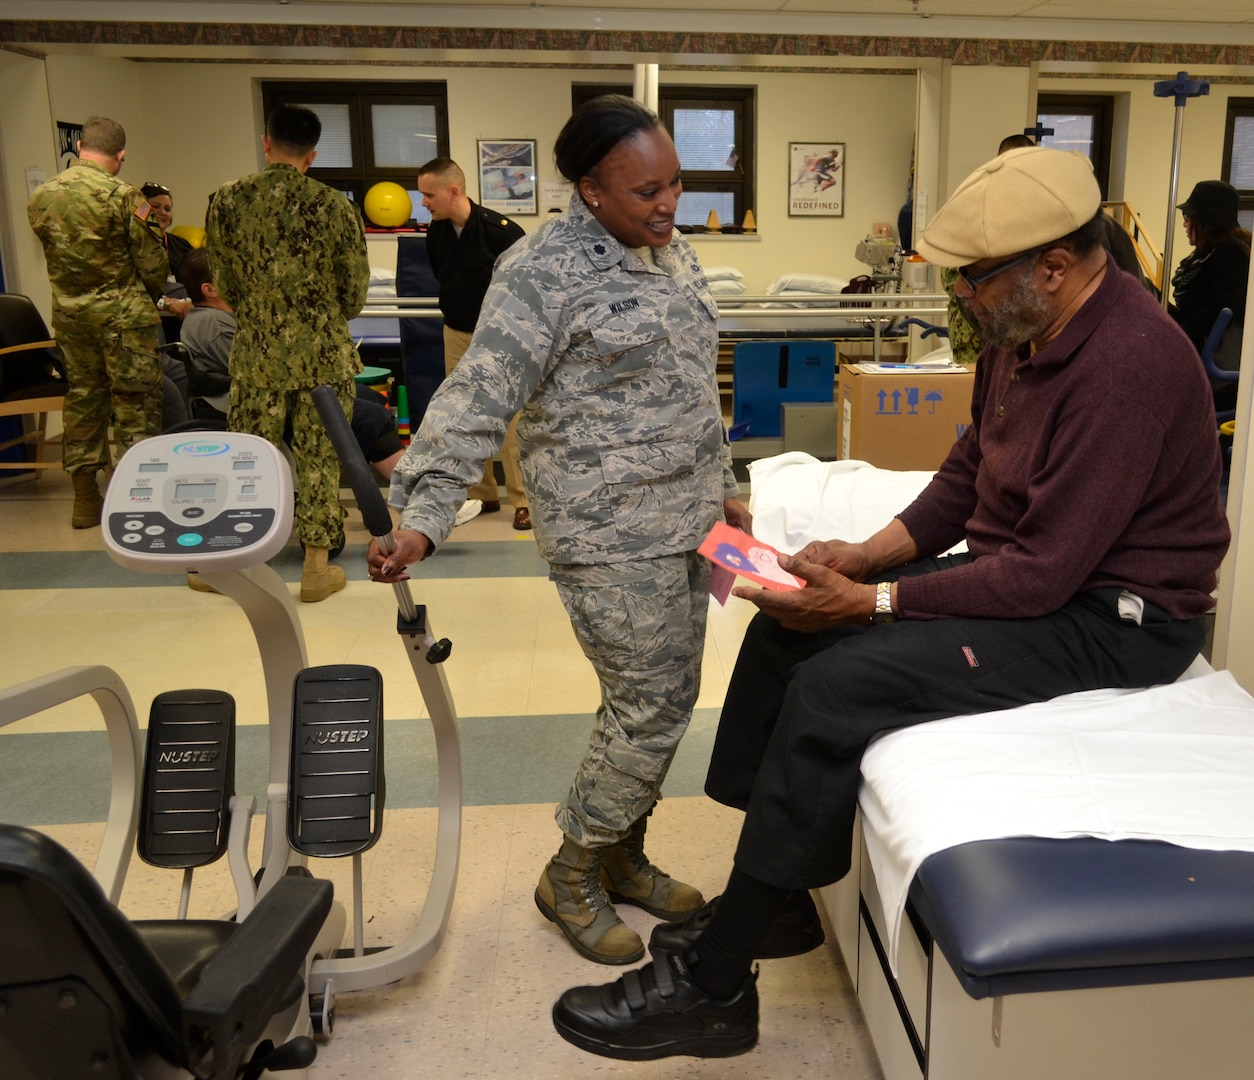 Air Force Lt. Col. Chiriga Wilson presents a thank you card to a patient receiving physical therapy at the Corporal Michael J. Crescenz Veterans Affairs Medical Center, Feb. 12, 2018 in Philadelphia.